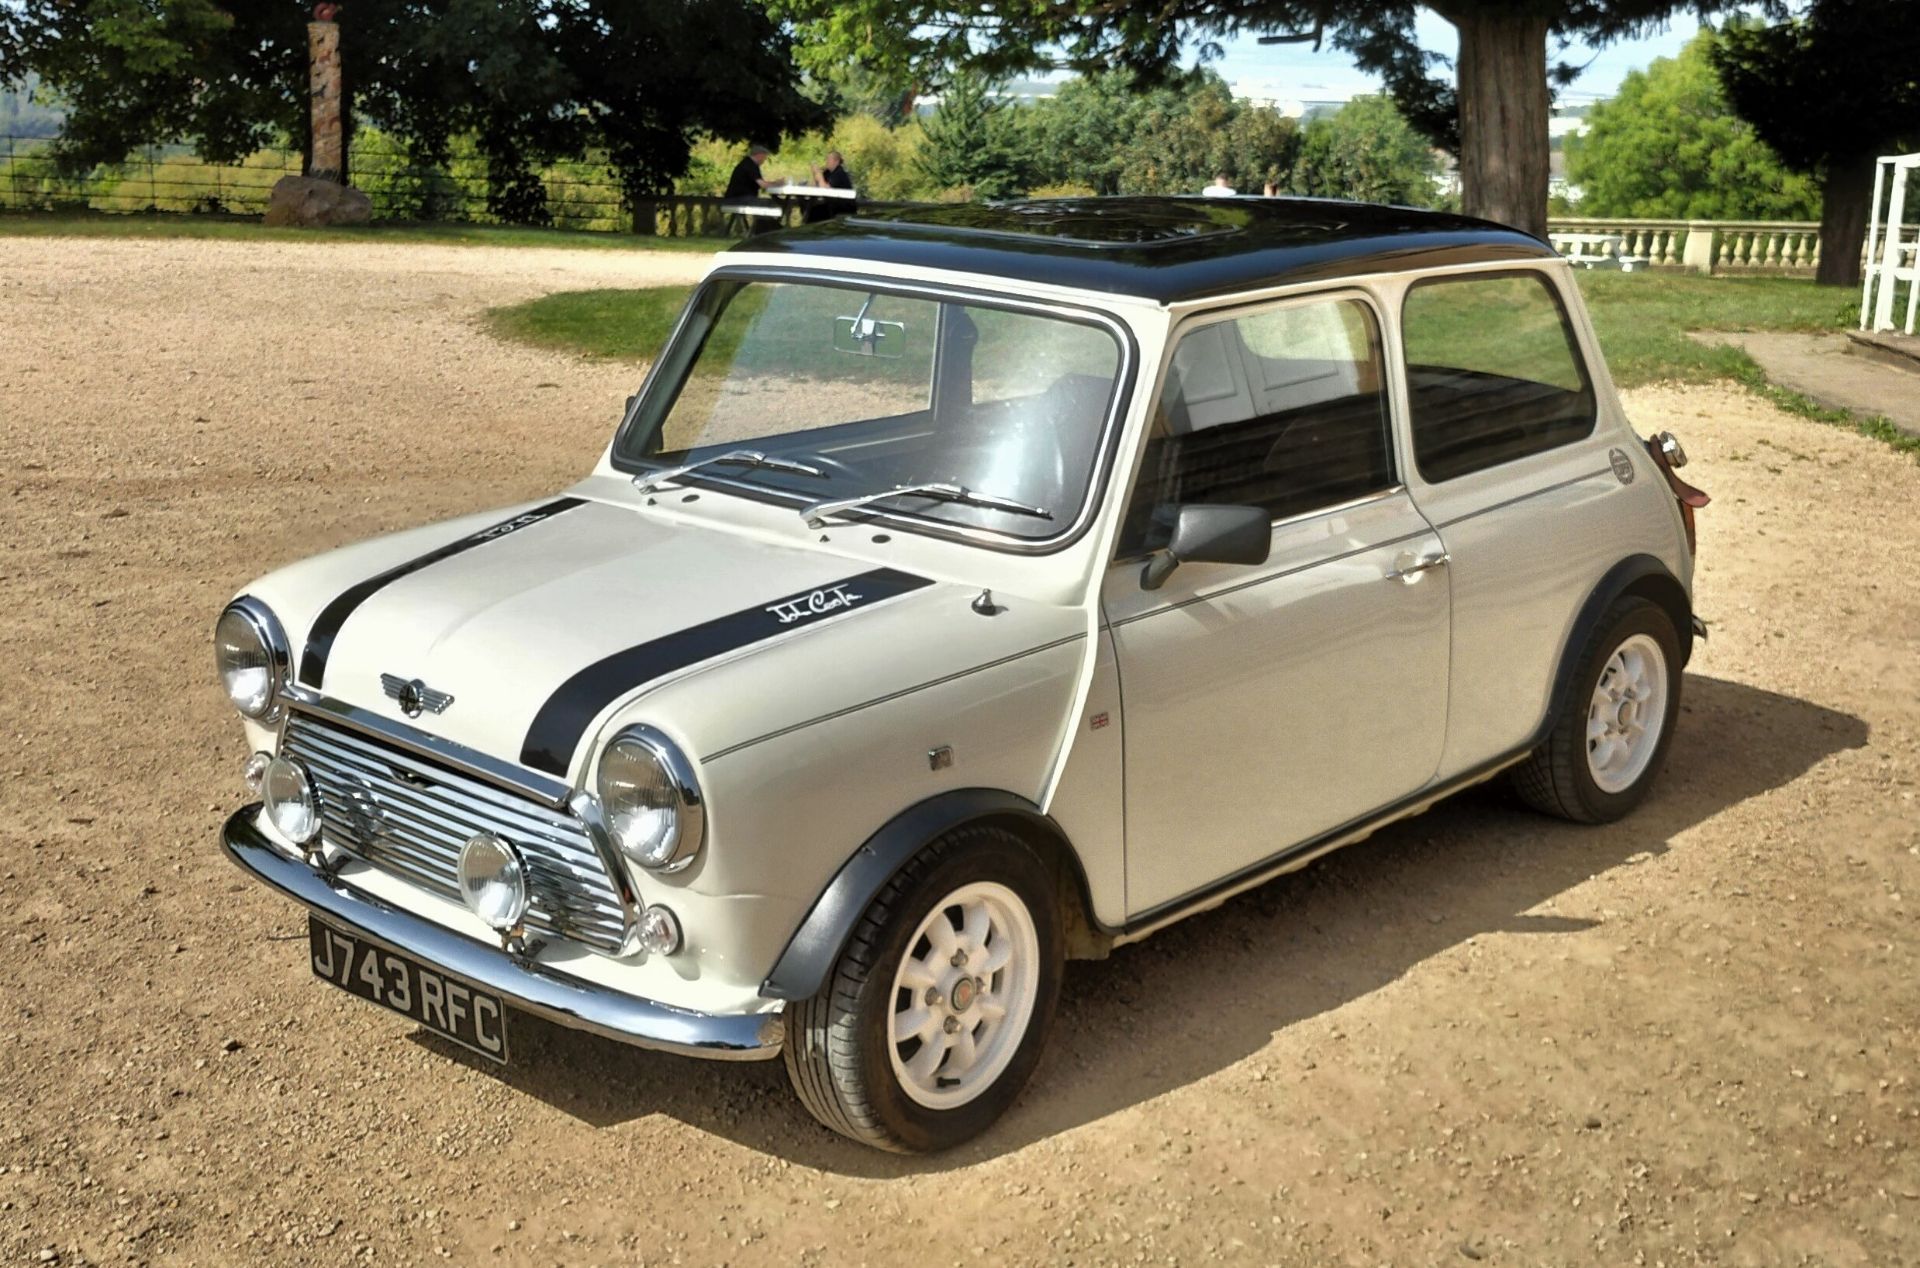 1992 ROVER MINI  Registration Number: J743 RFC Chassis Number: SAXXL2S1020509521 Launched in 1959,